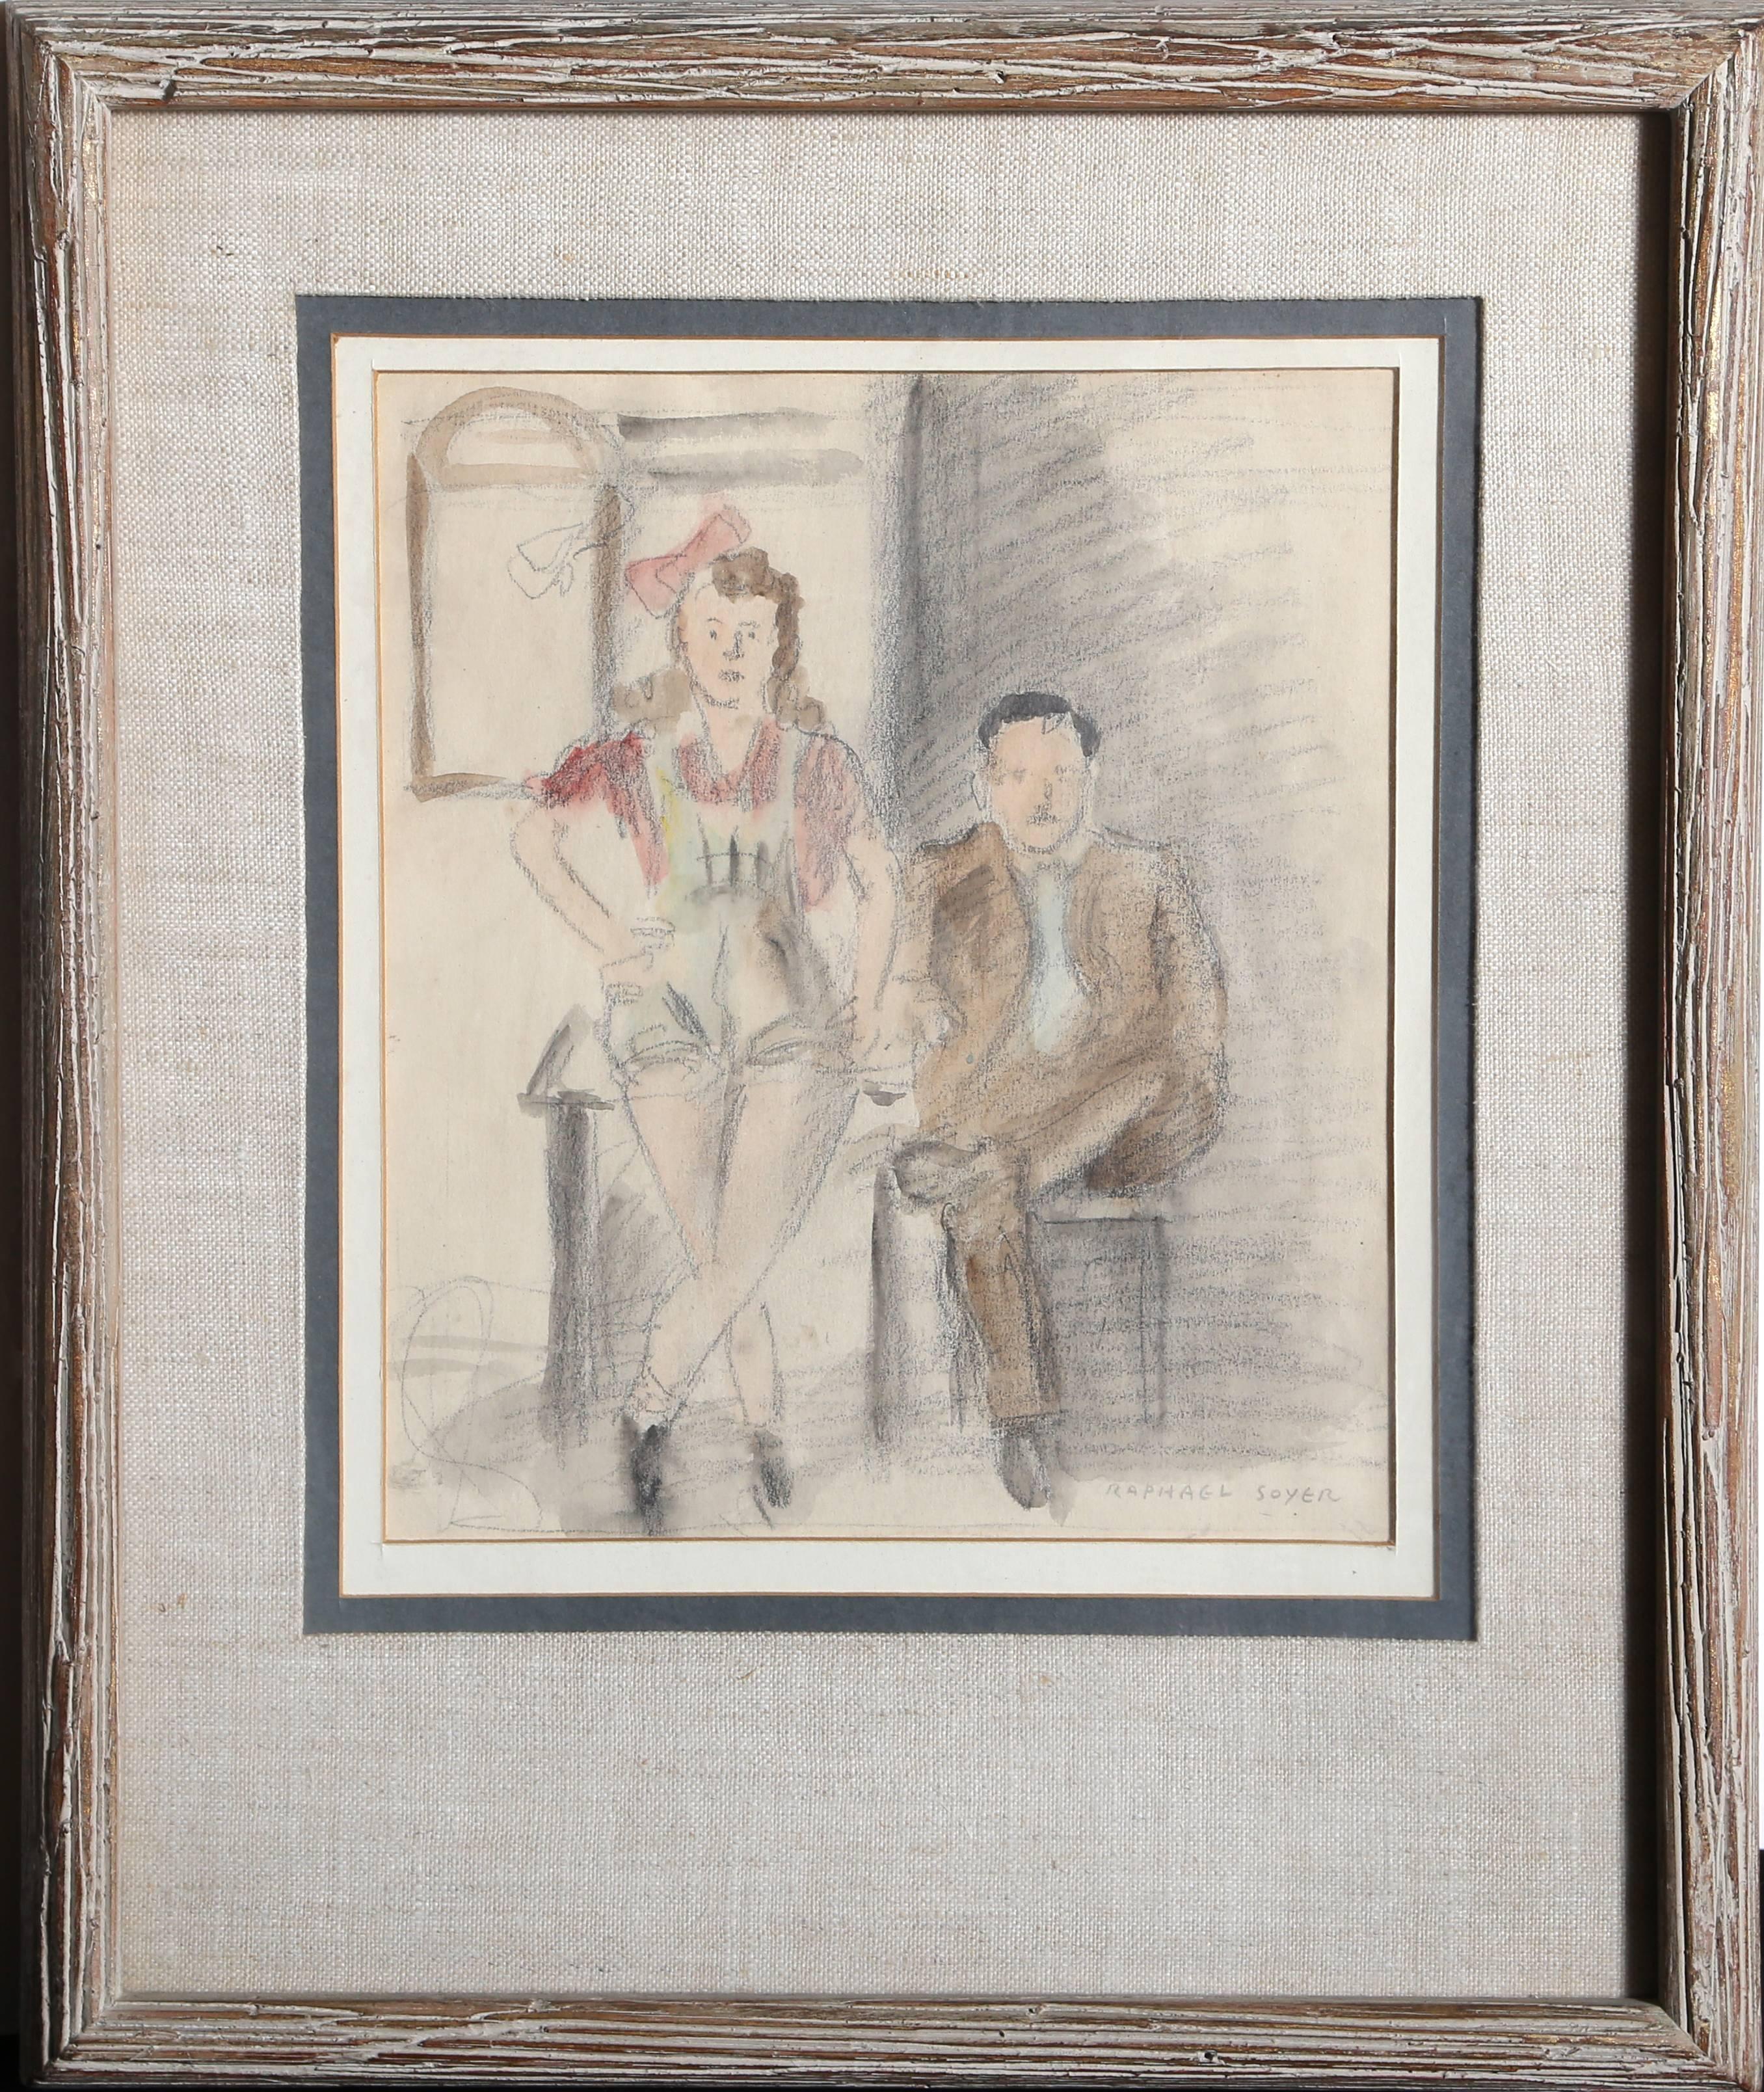 Seated Couple, Pencil and Watercolor on Paper by Raphael Soyer